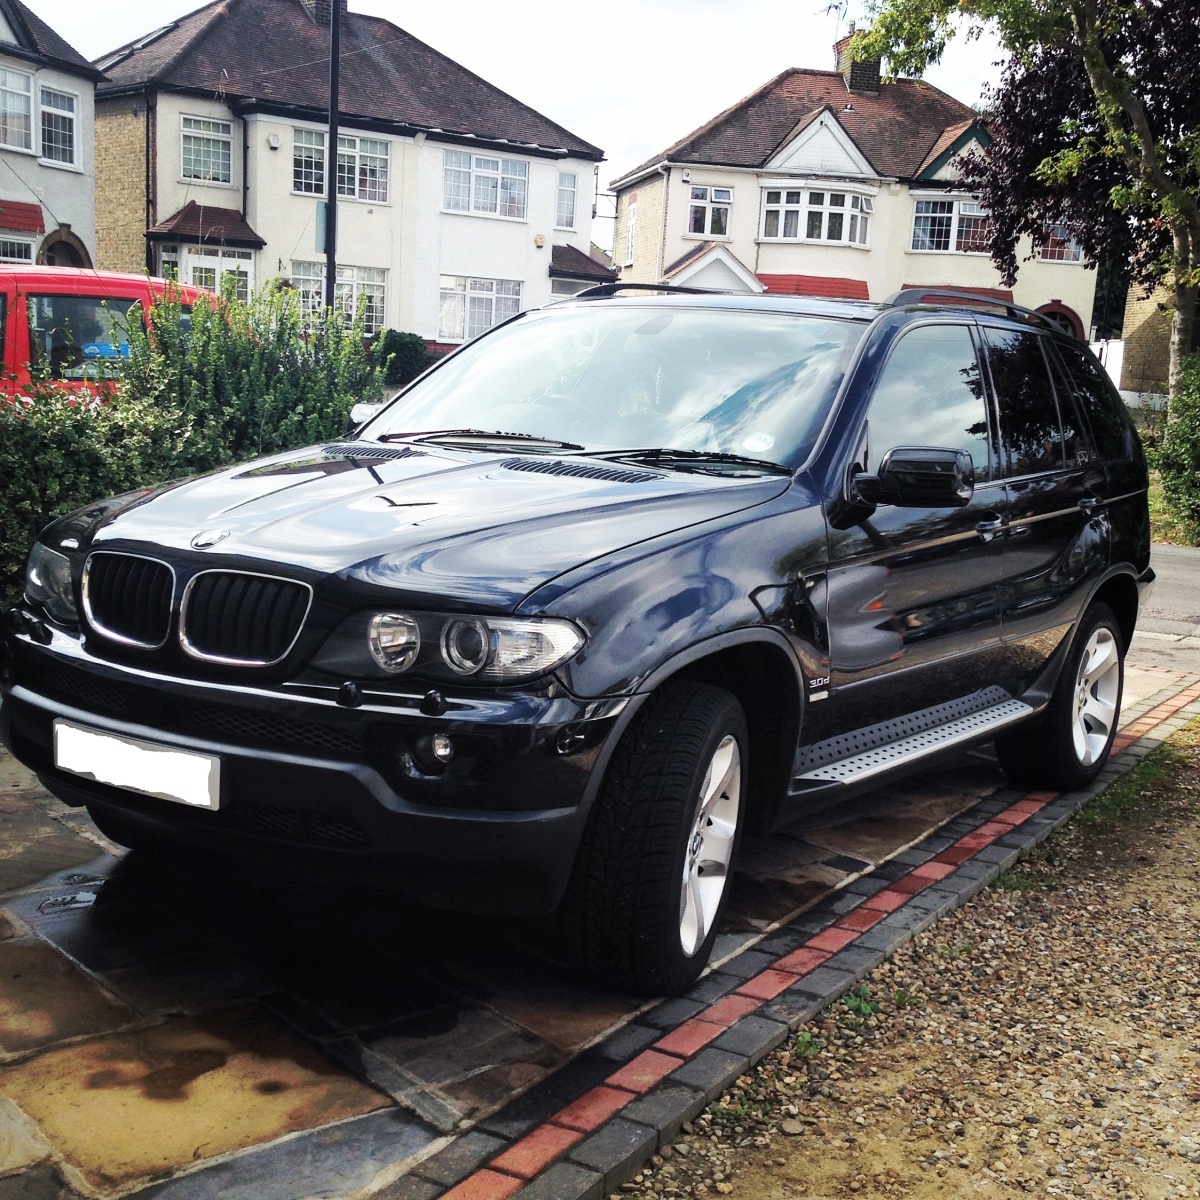 BMW X5 E53 1st Generation - What To Check Before You Buy